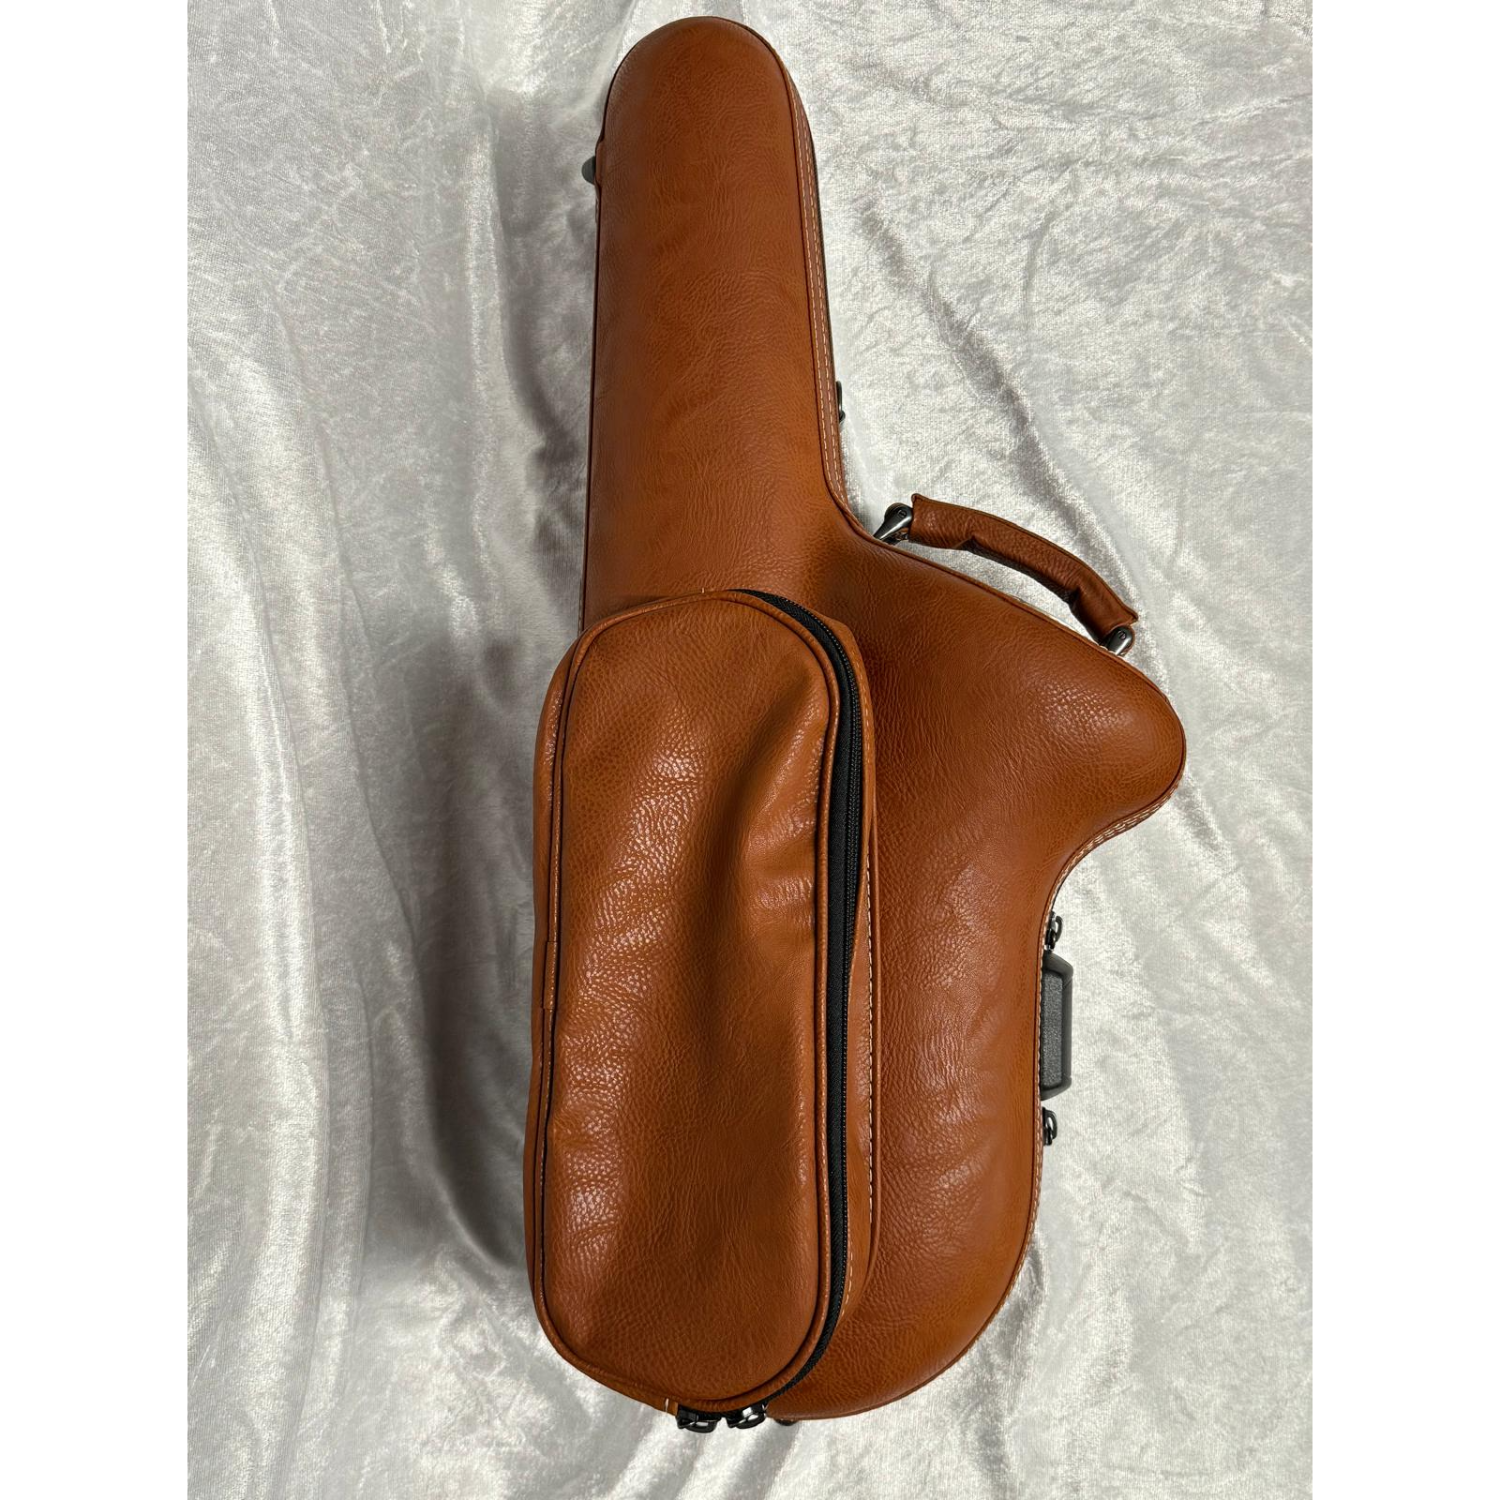 brown leather case, closed, showing external accessory pouch, on white velvet background